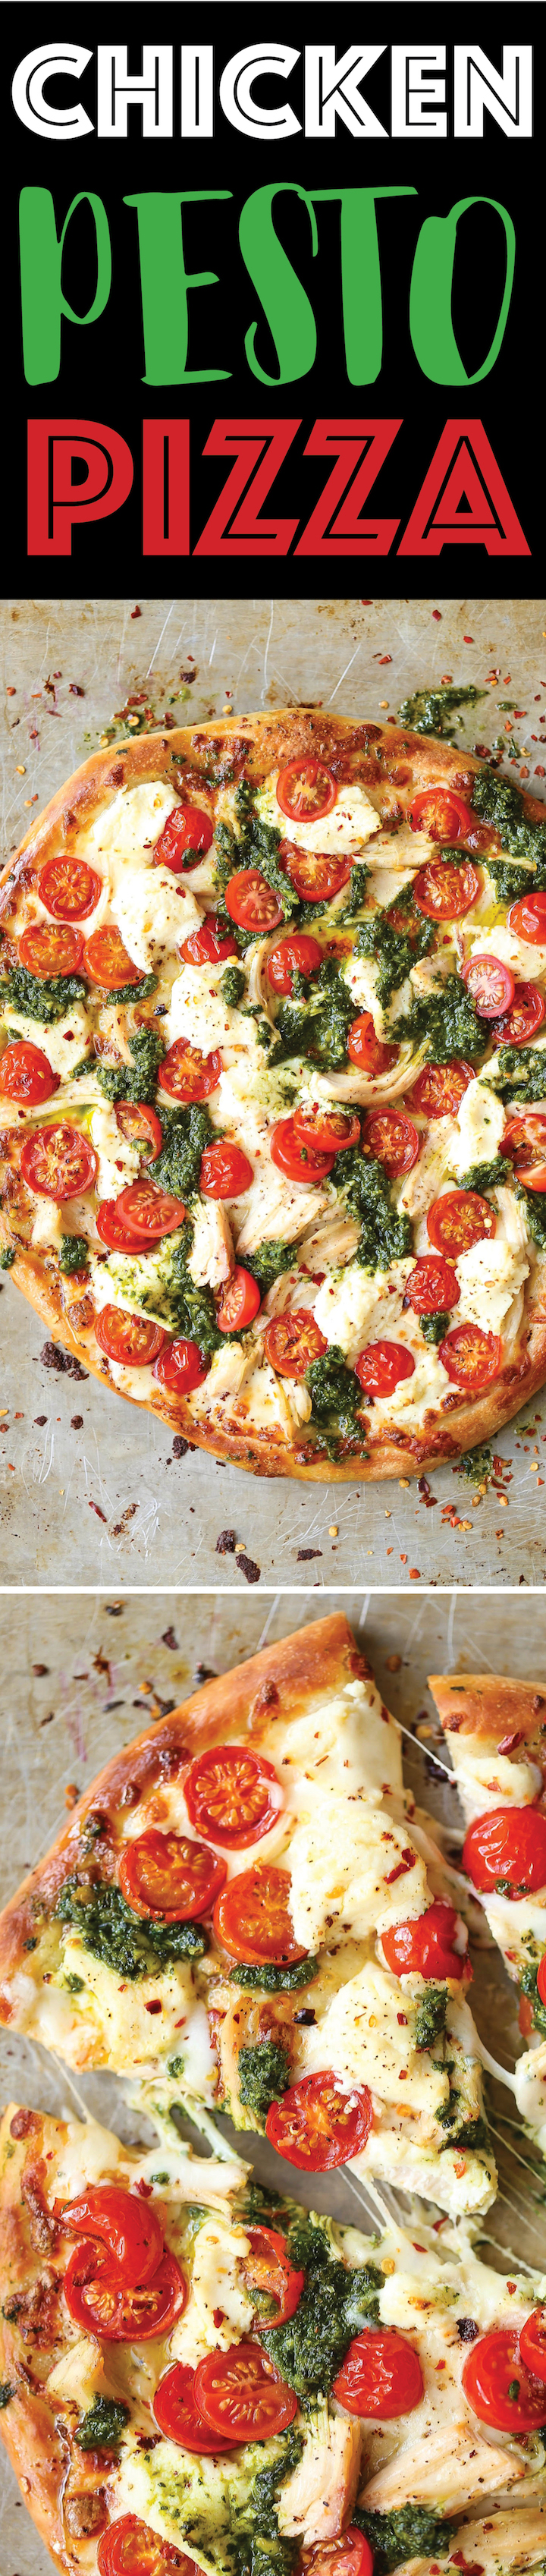 Chicken Pesto Pizza - The absolute perfect weeknight meal that comes together in minutes! Use leftover rotisserie chicken, fresh tomatoes, pesto and cheese!